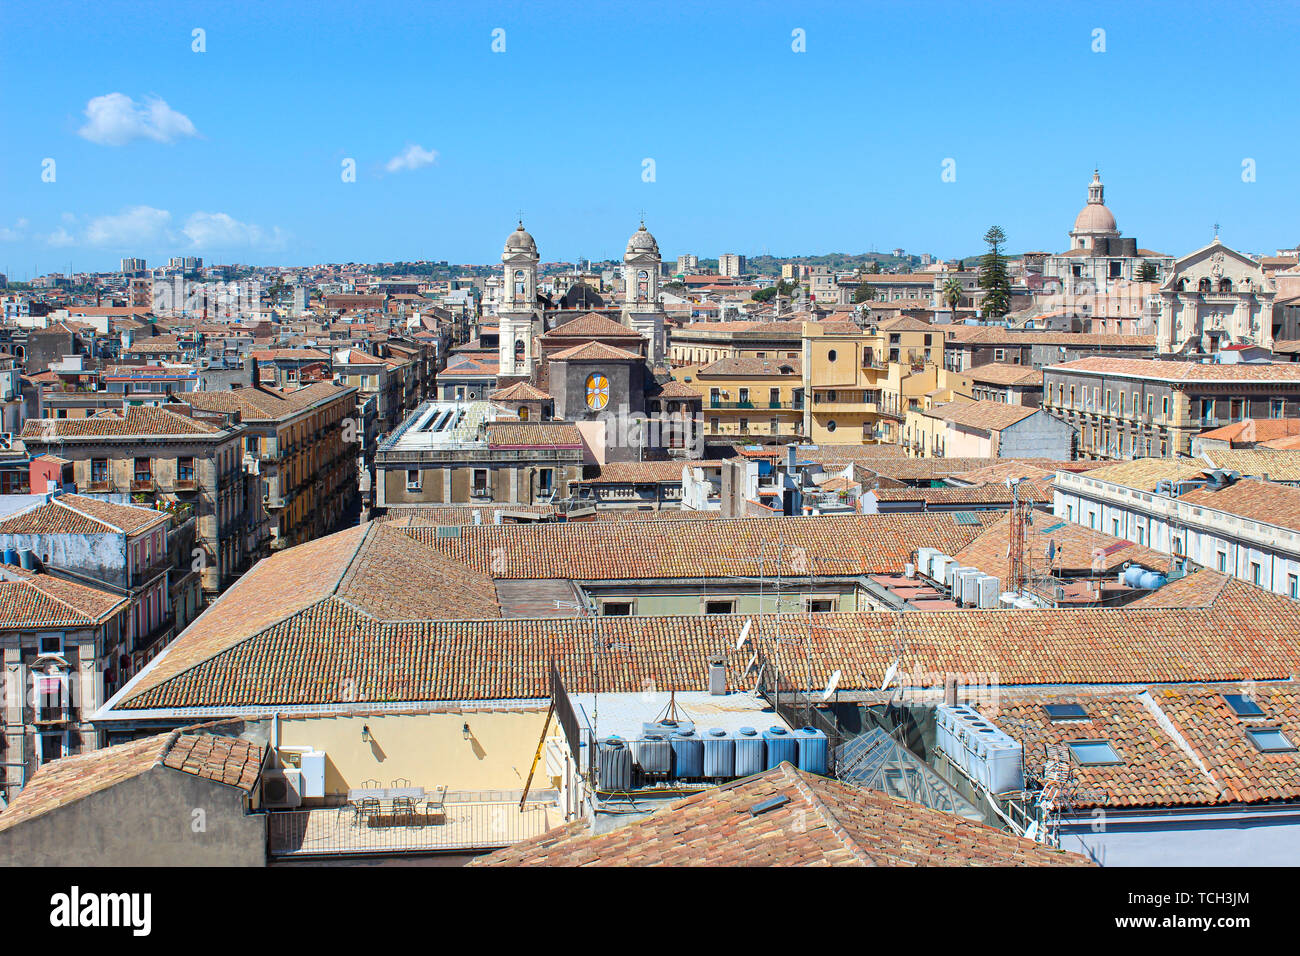 Beautiful cityscape of Sicilian city Catania, Italy taken from a view point above the city center. Catania has many historical sites and is a popular tourist attraction. Blue sky, sunny day. Stock Photo